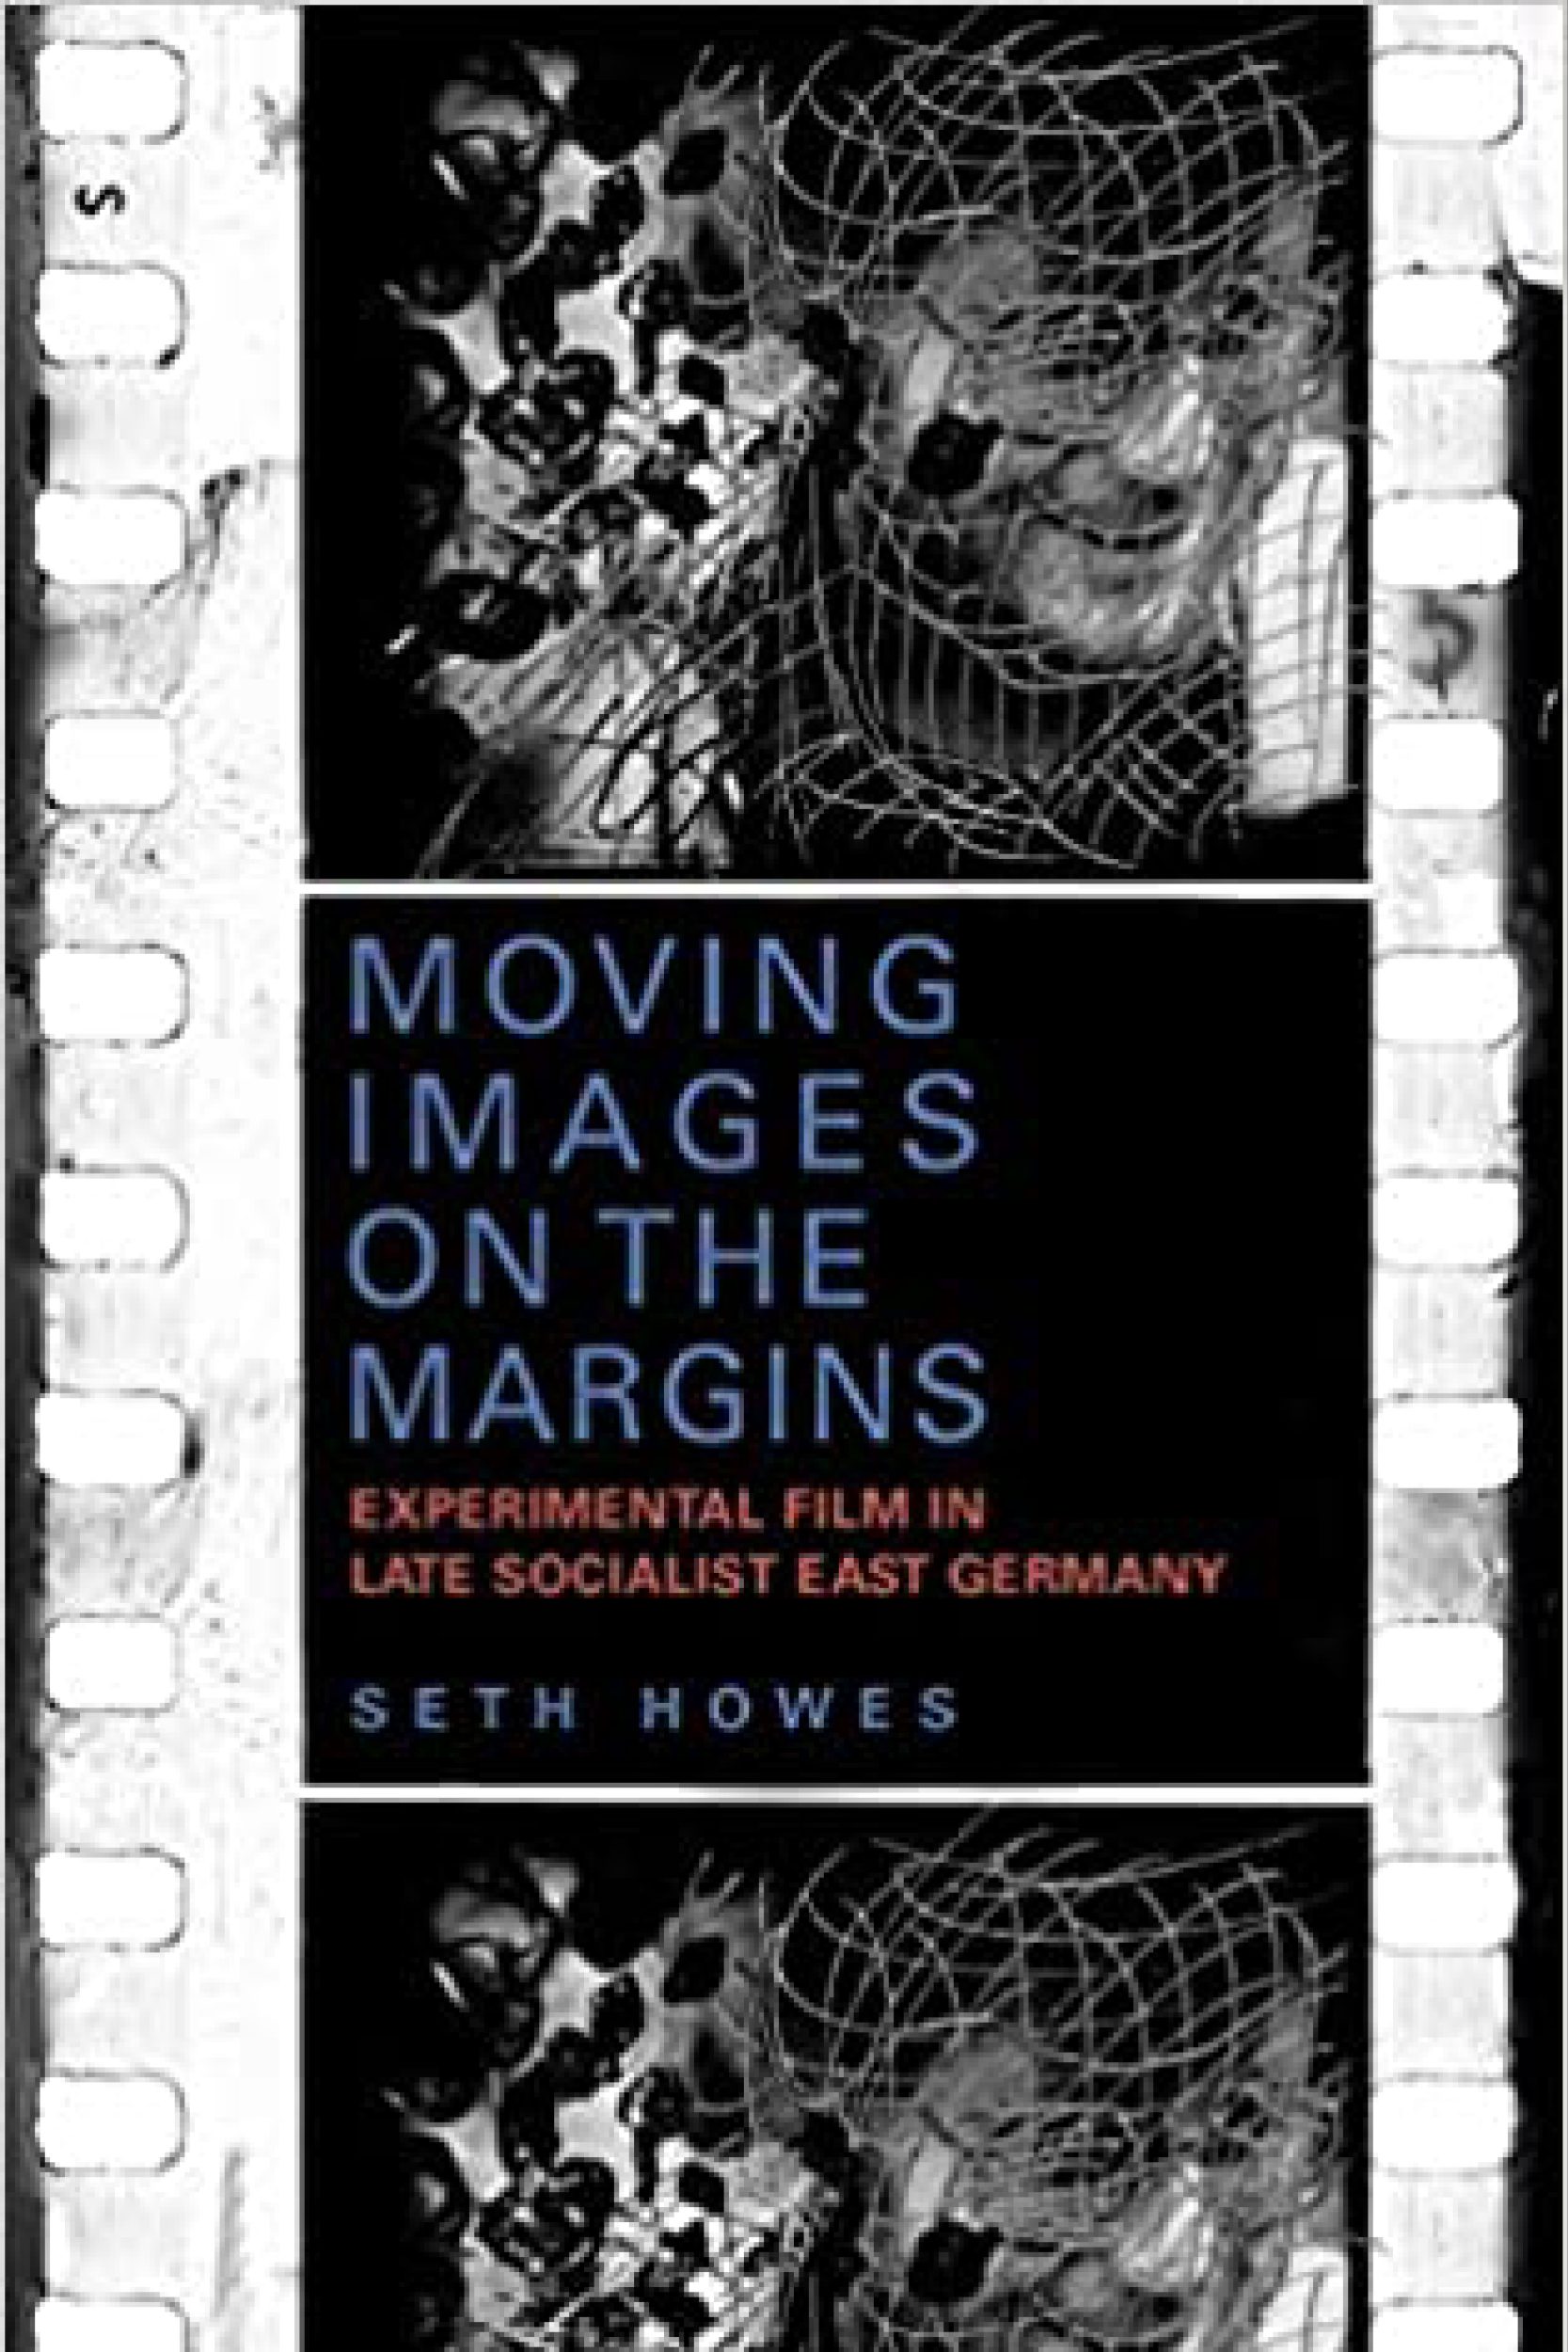 Seth Howes (University of Missouri). Moving Images on the Margins: Experimental Film in Late Socialist East Germany (Camden House).